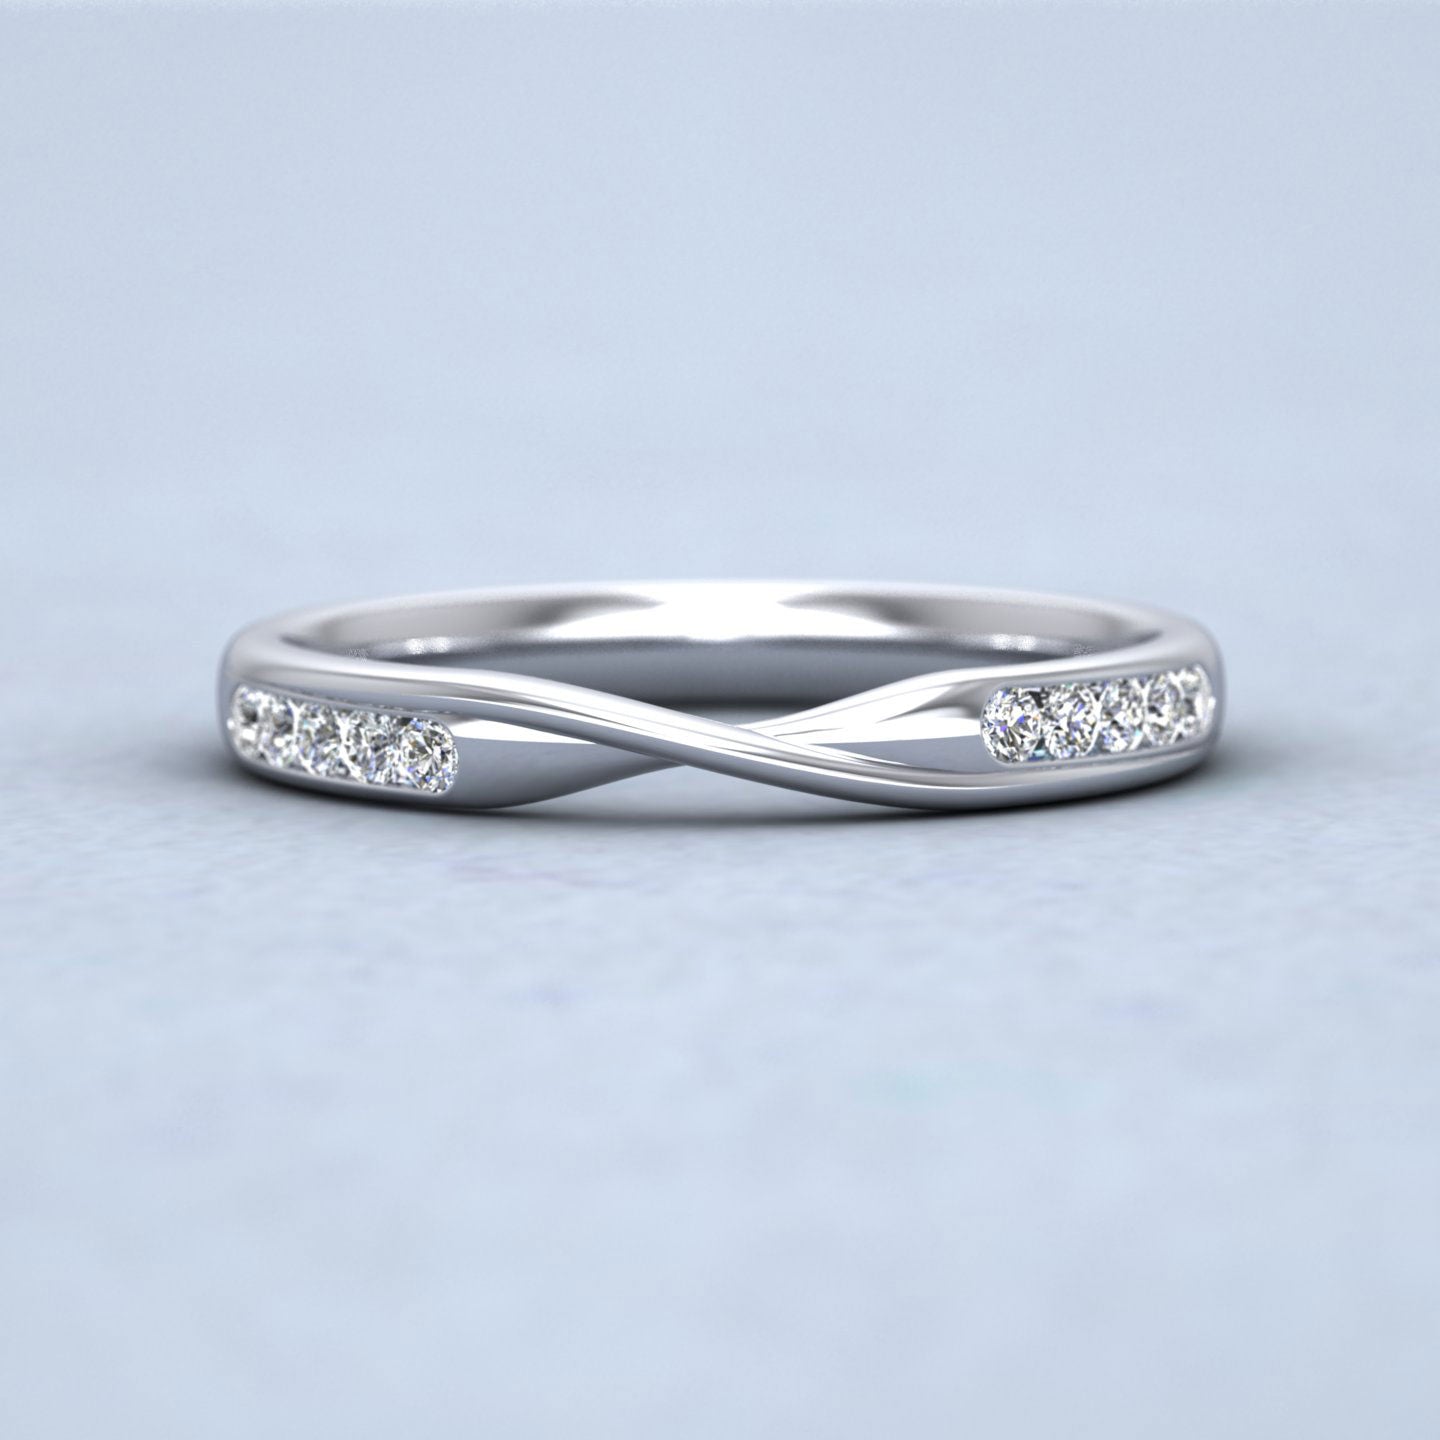 Crossover Pattern Wedding Ring In 18ct White Gold 2.5mm Wide With Eight Diamonds